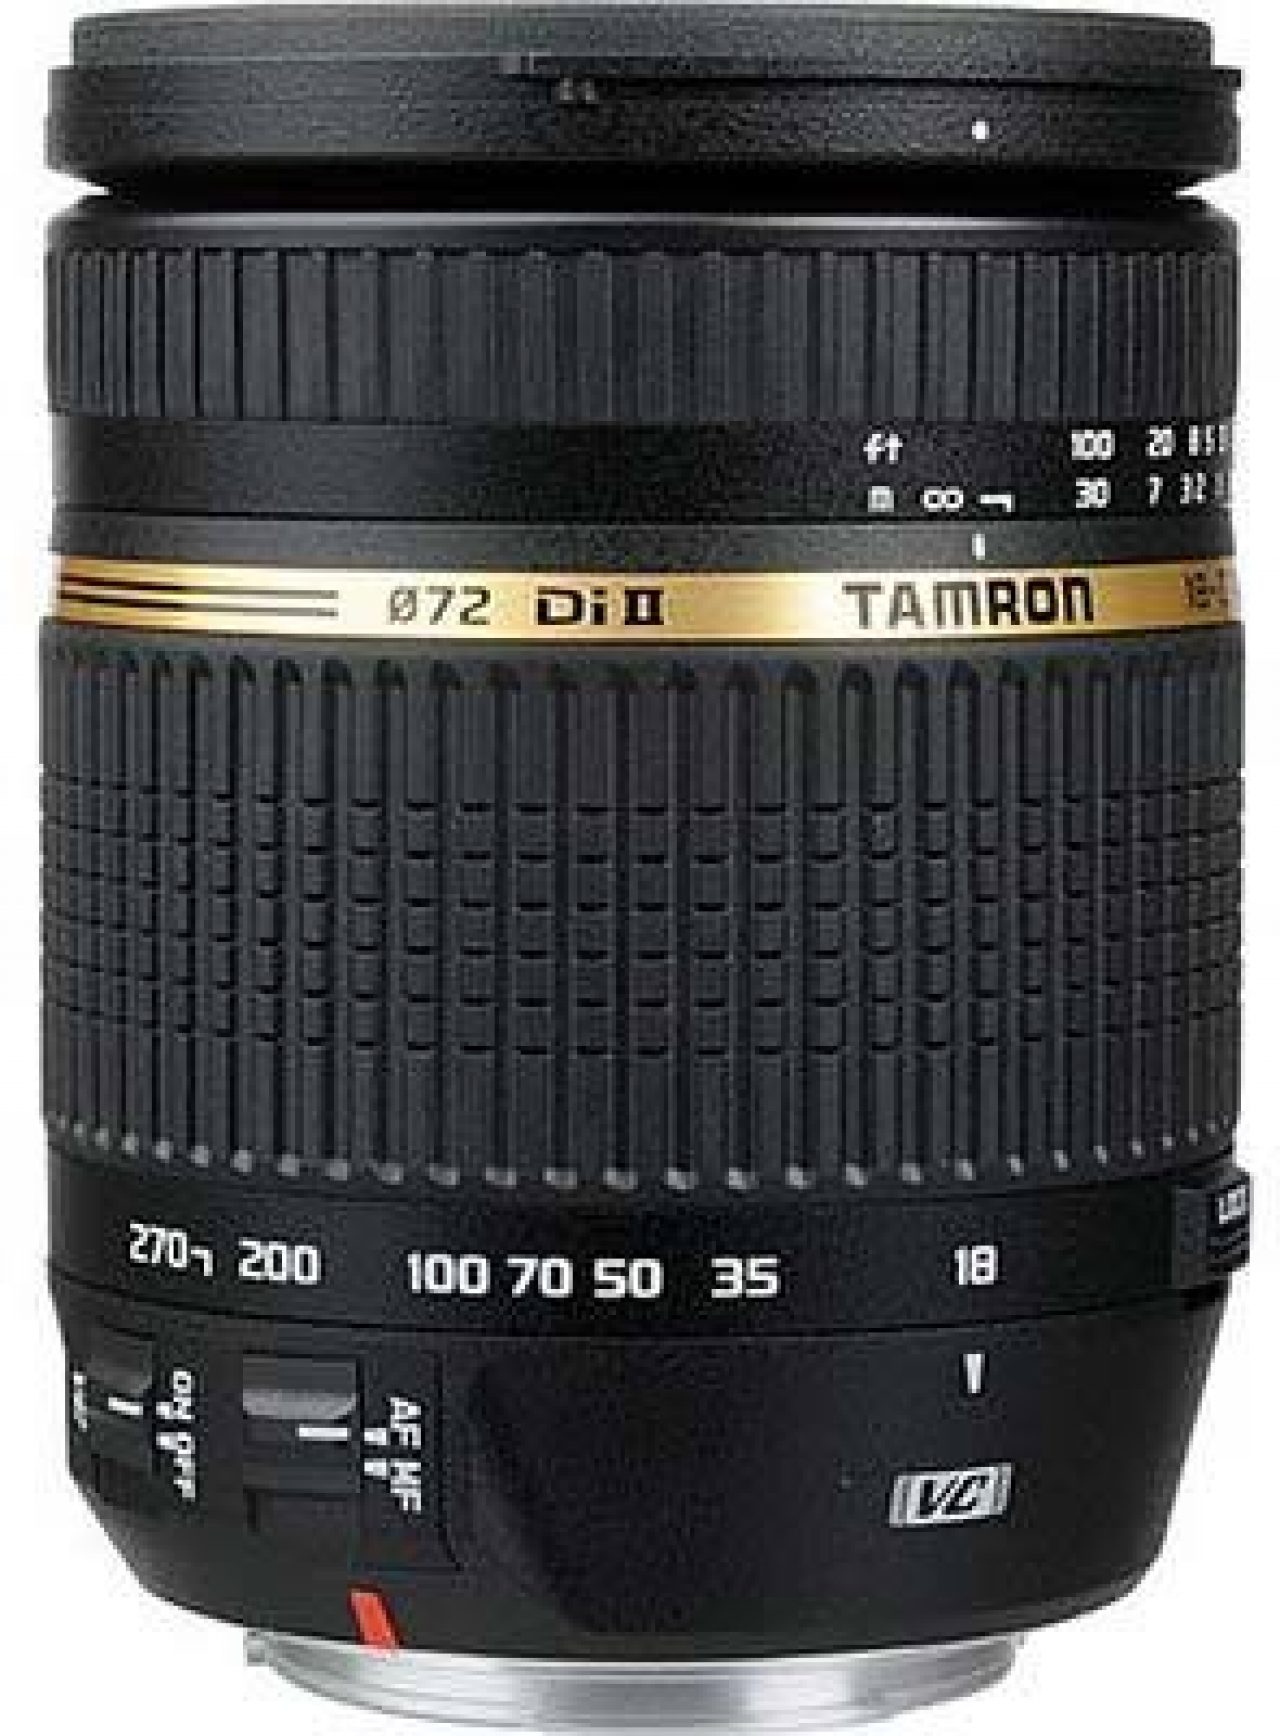 Tamron AF 18-270mm F/3.5-6.3 Di II VC PZD Review | Photography Blog